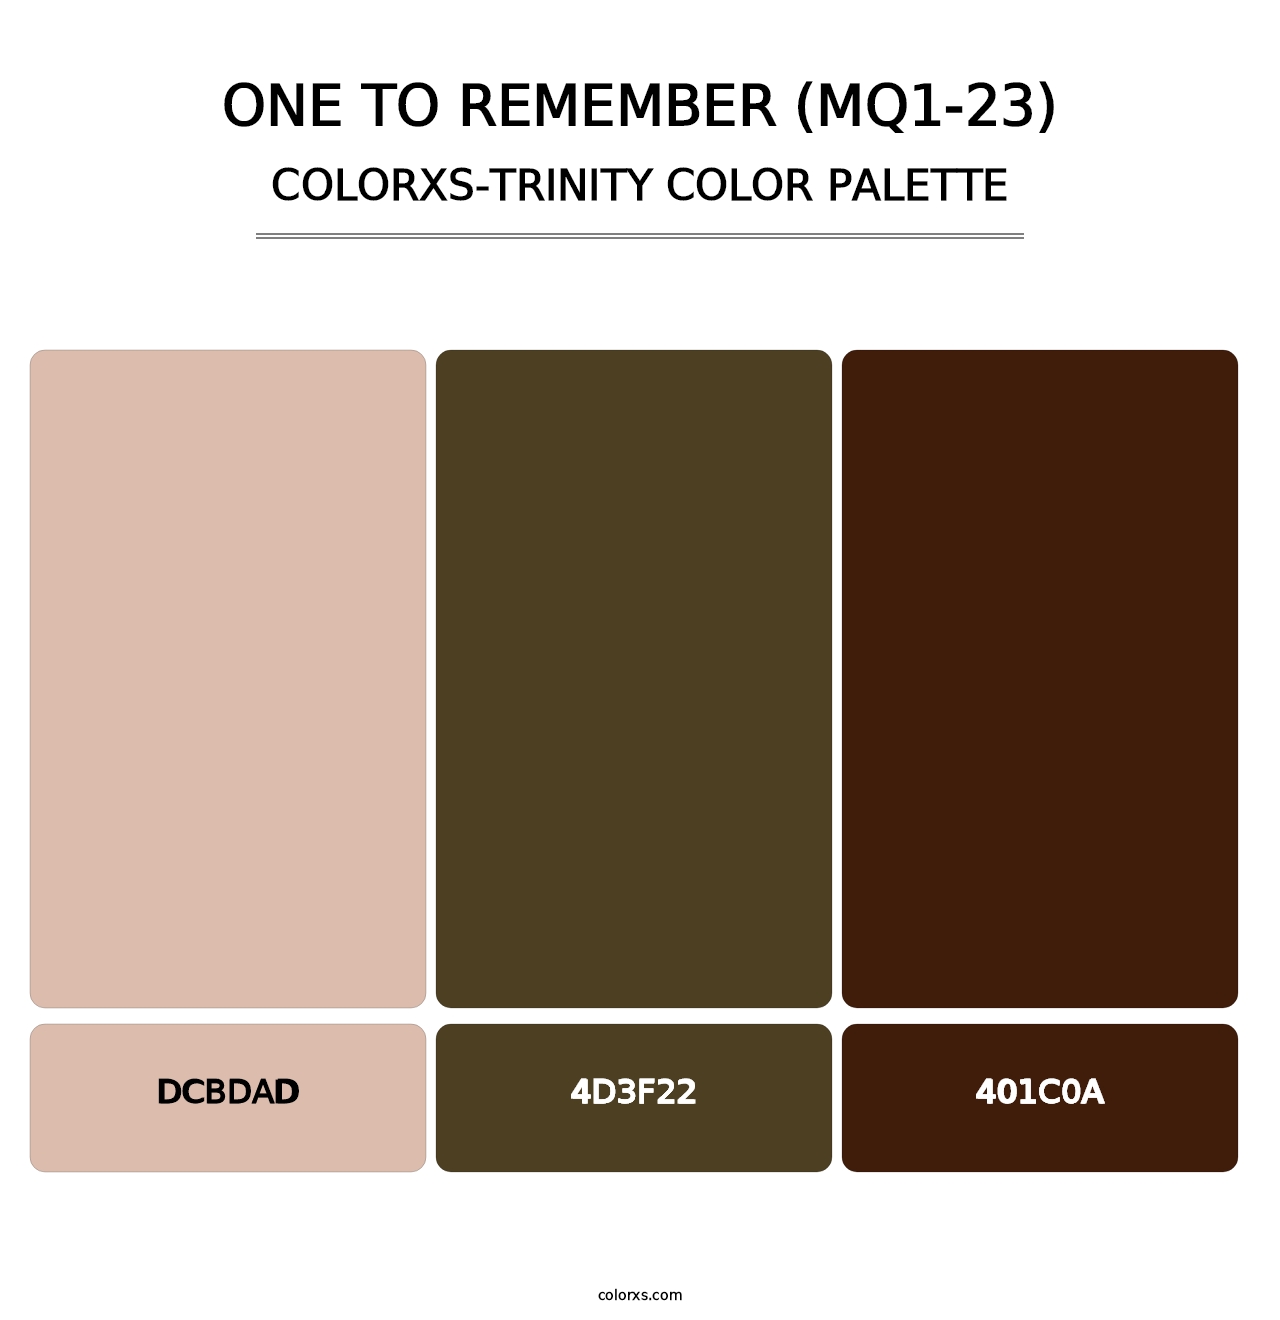 One To Remember (MQ1-23) - Colorxs Trinity Palette